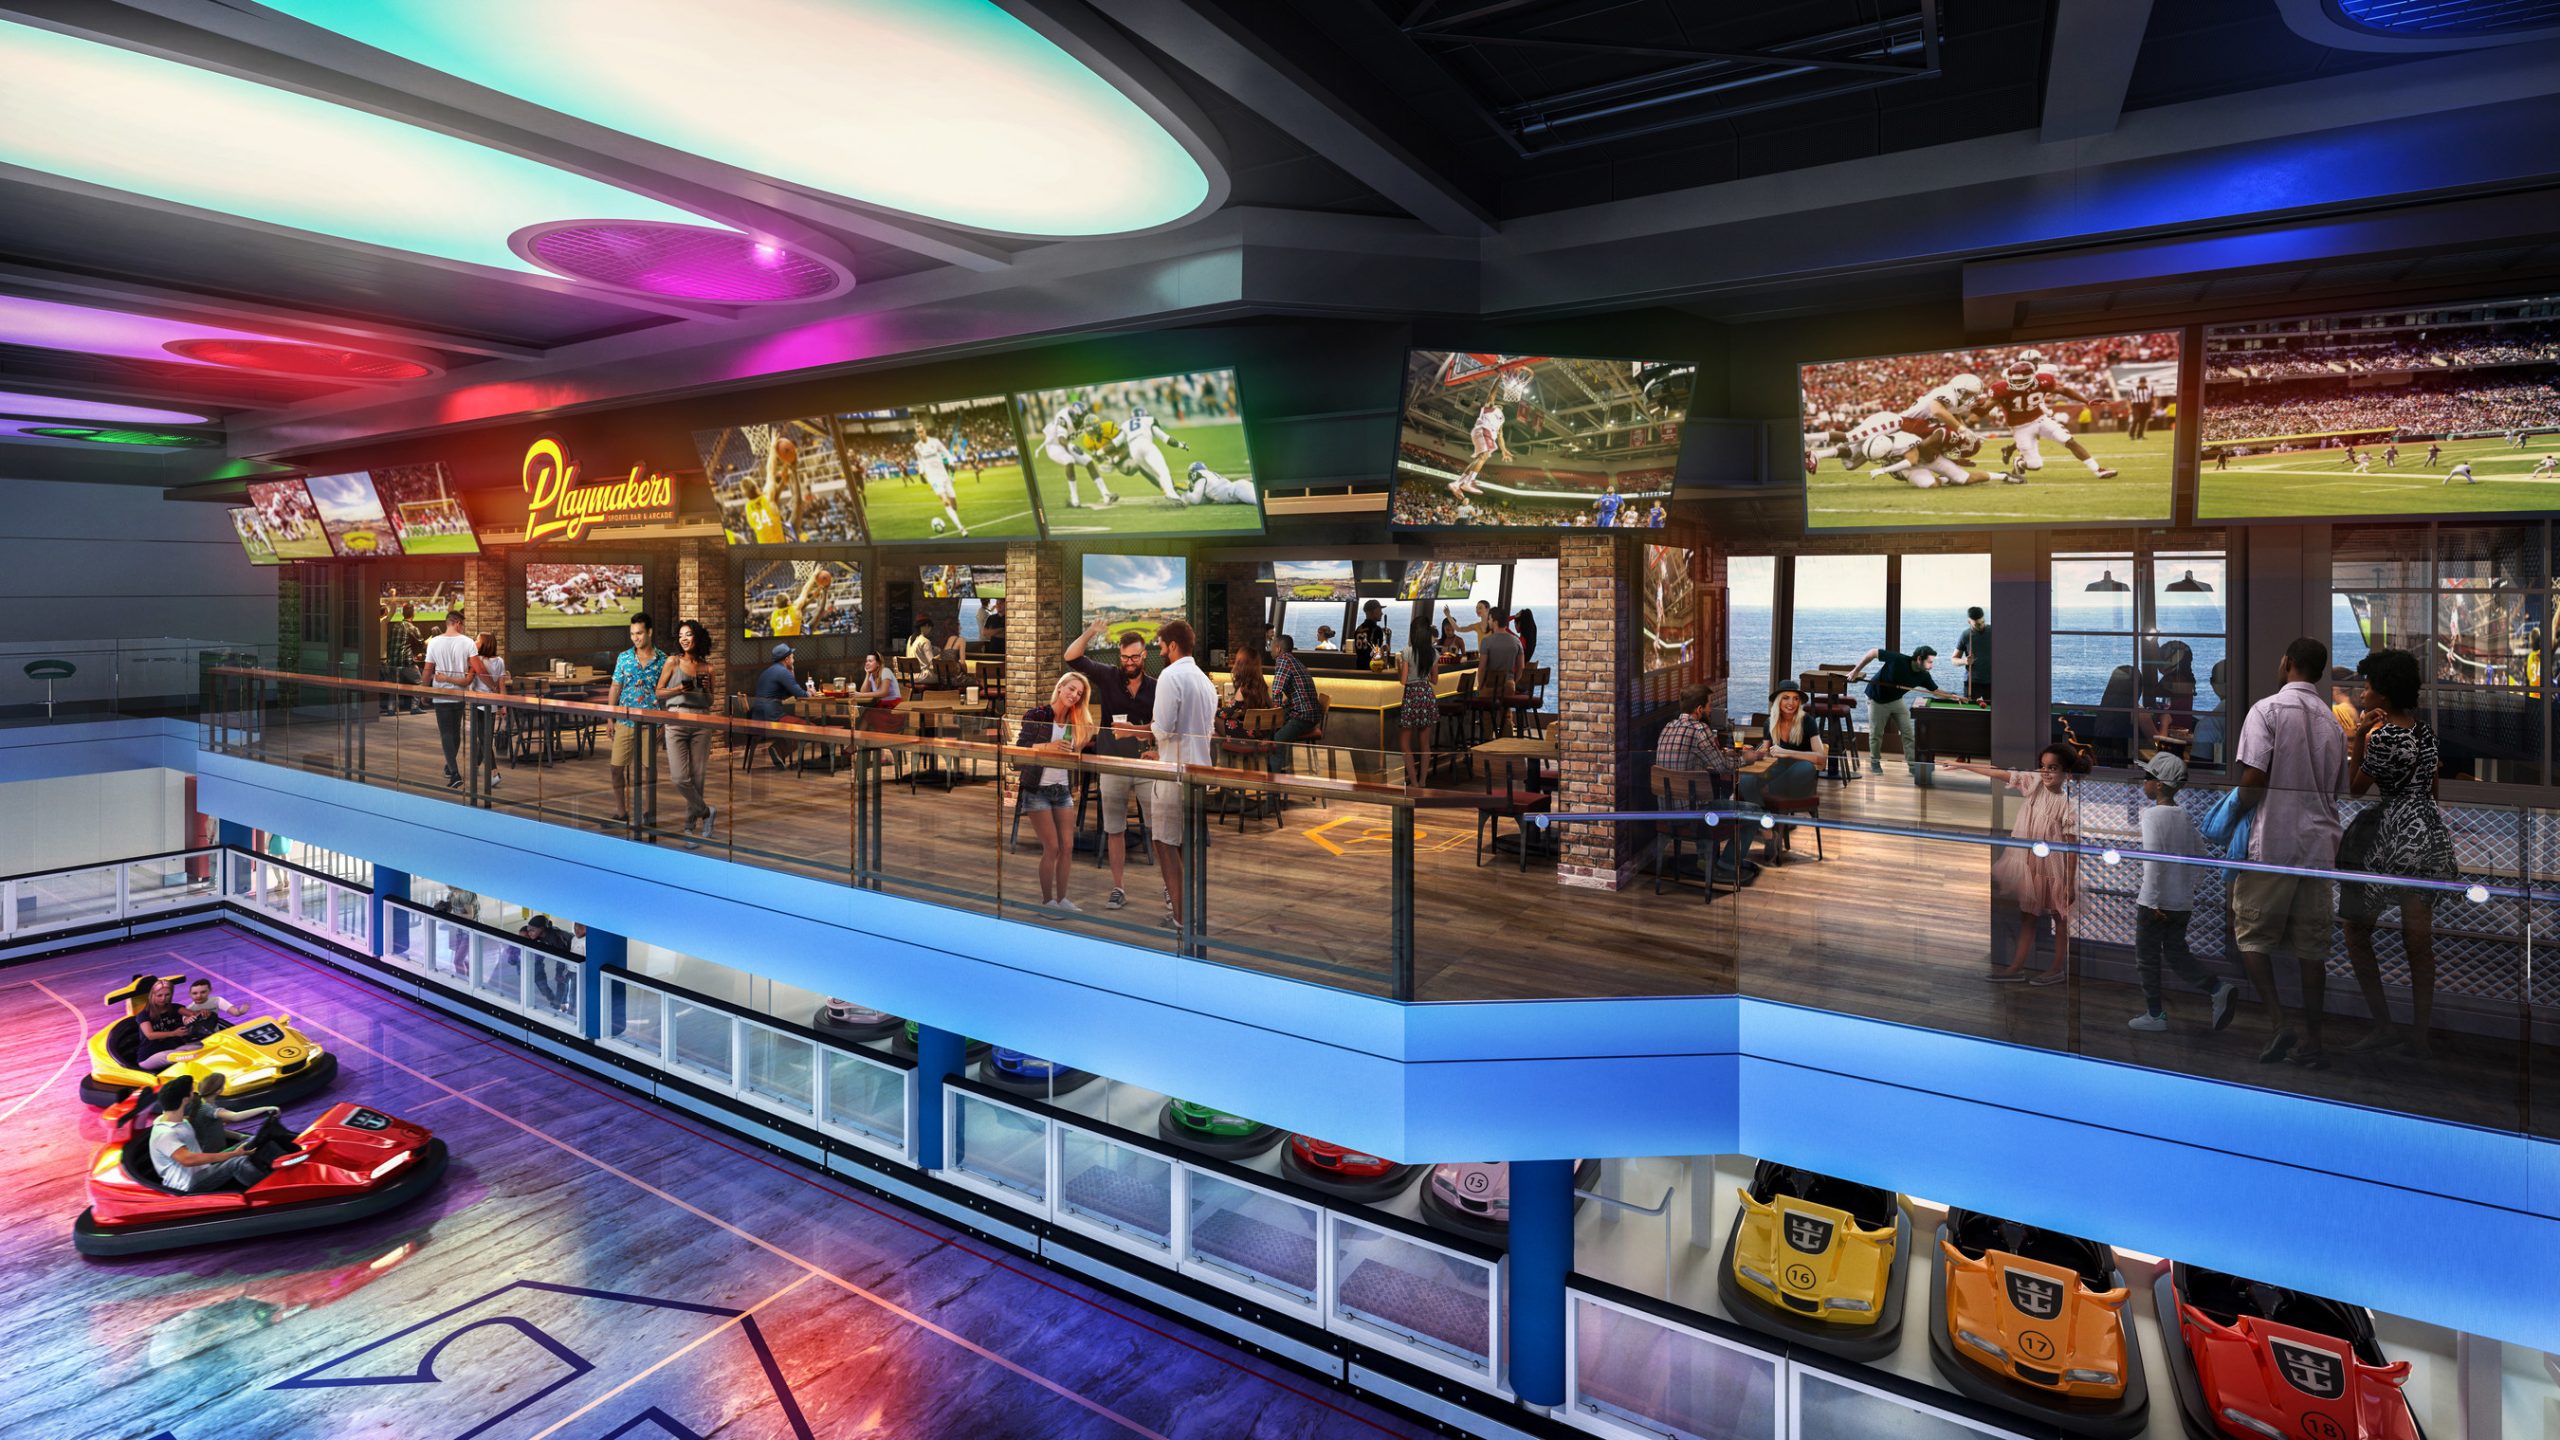 Odyssey of the Seas will combine the best of Quantum Class with new Royal Caribbean favorite Playmakers Sports Bar & Arcade, now boasting a prime location within SeaPlex. With TVs at every angle to cheer on the home team and club-level views of the competition below, sports fans won’t miss a beat. Odyssey debuts in Haifa, Israel in May 2021 and then heads to Fort Lauderdale, Florida in November. (Royal Caribbean International)